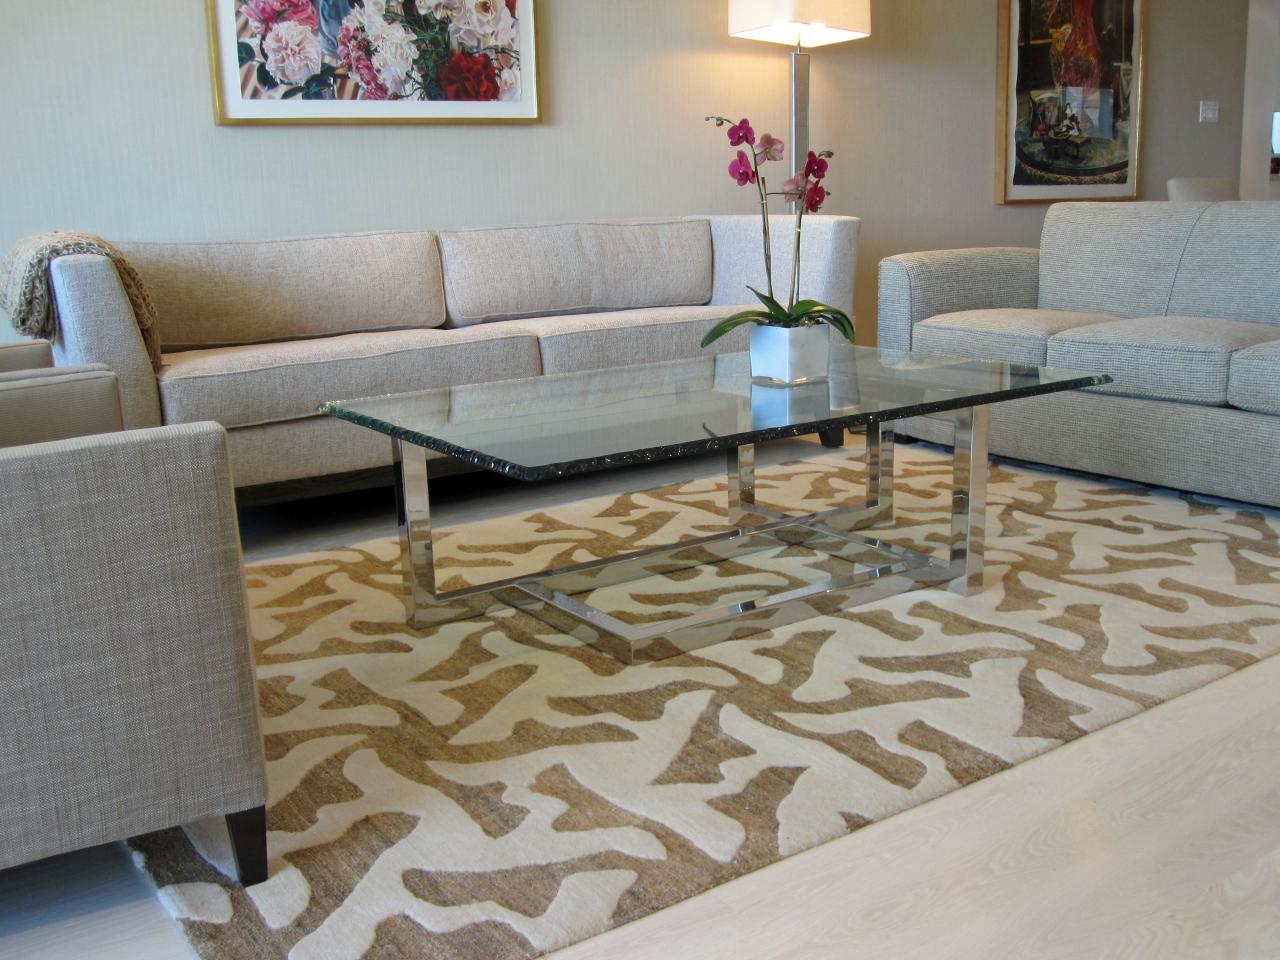 Choosing The Best Area Rug For Your, What Color Rug For Living Room